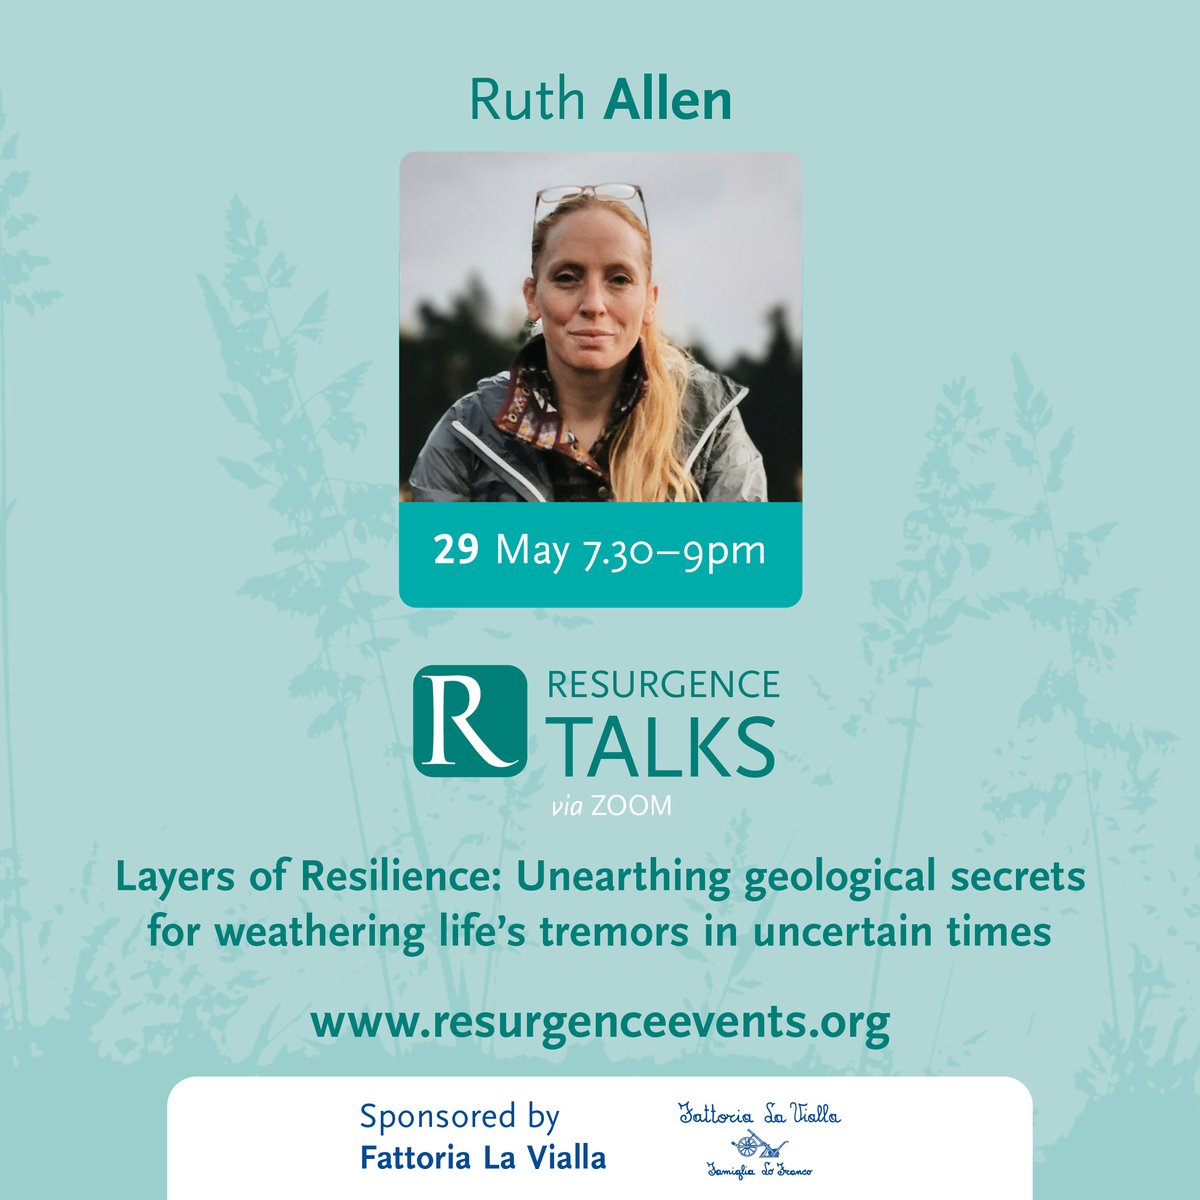 #ResurgenceTalks Ruth Allen @geotherapist – 'Layers of resilience: unearthing geological secrets for weathering life’s tremors in uncertain times' Wednesday 29 May, 7:30—9:00pm BST, via Zoom An exploration of how the often-overlooked rocky foundations beneath our feet can help